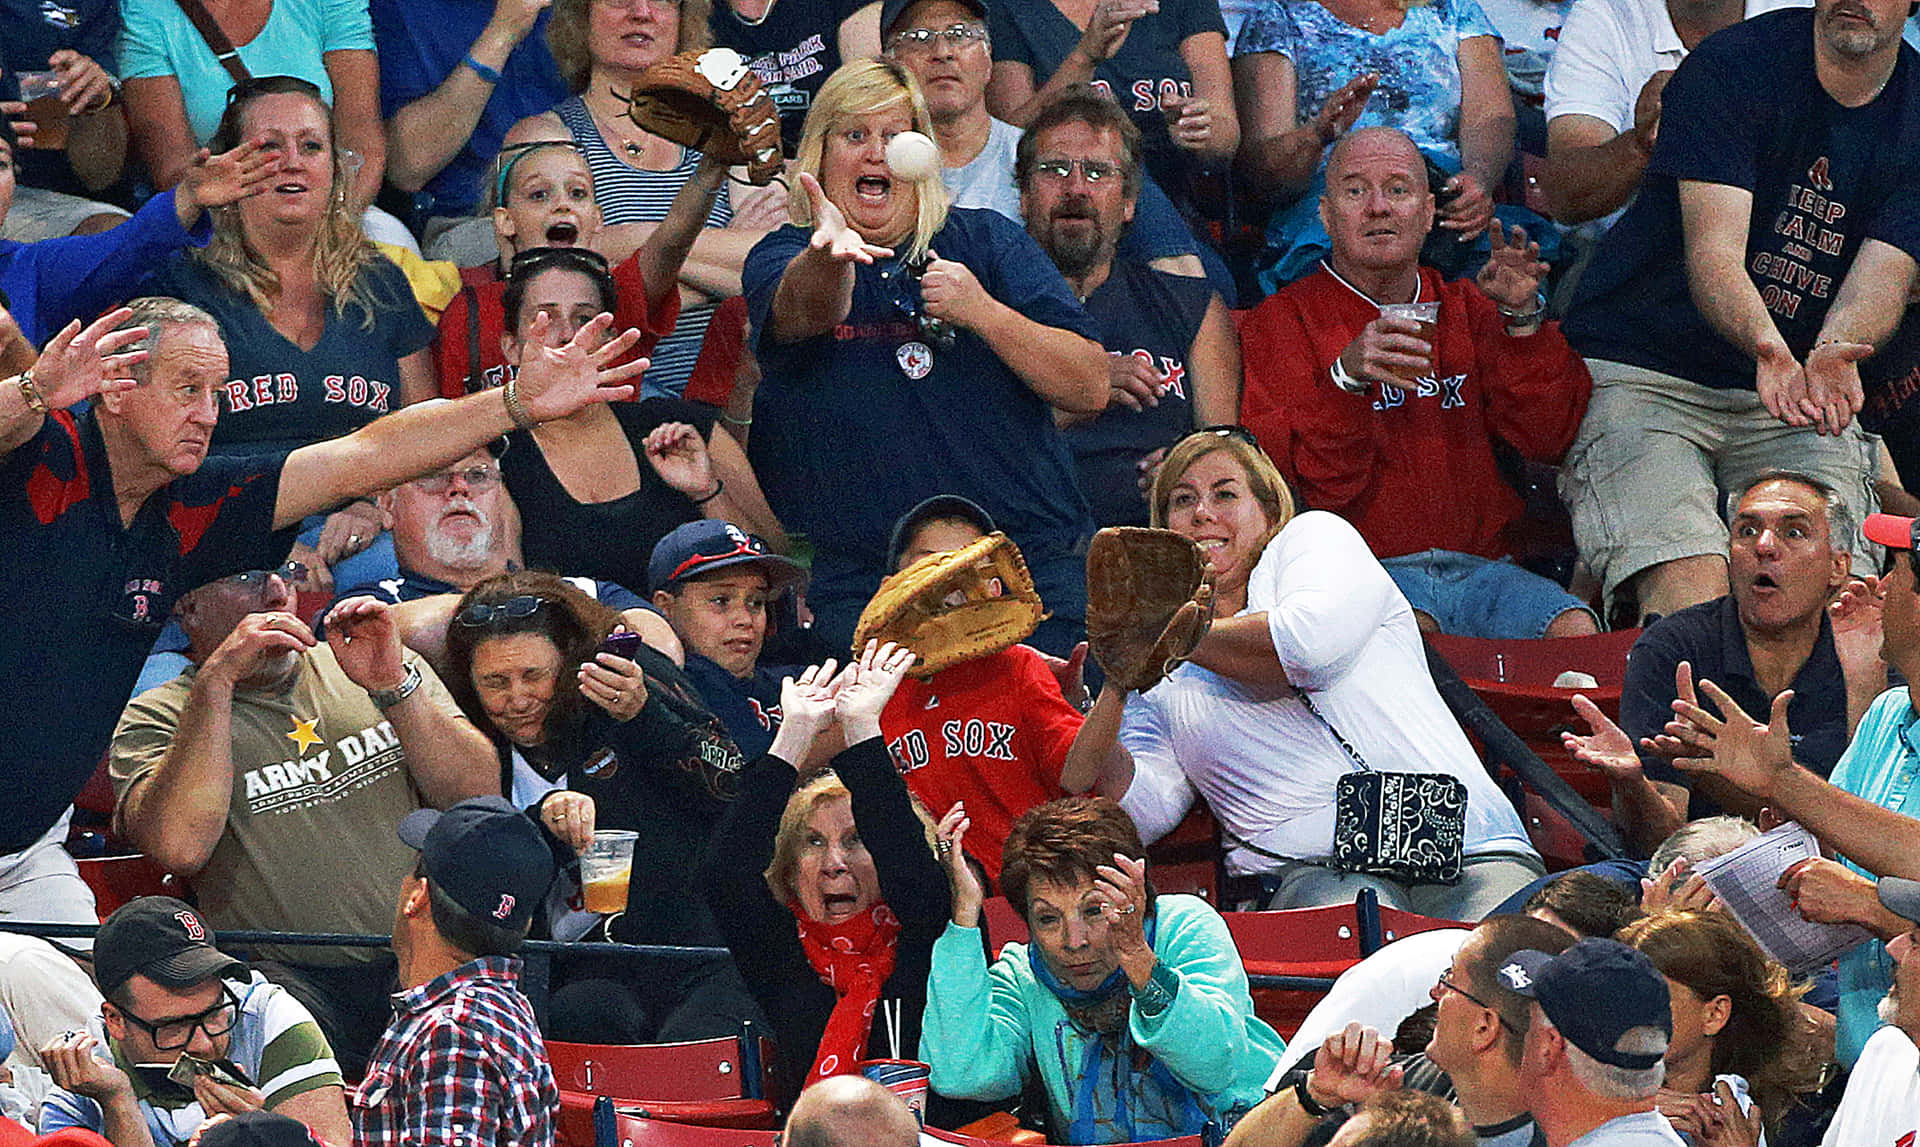 Funny Sports Crowd Catching Baseball Picture